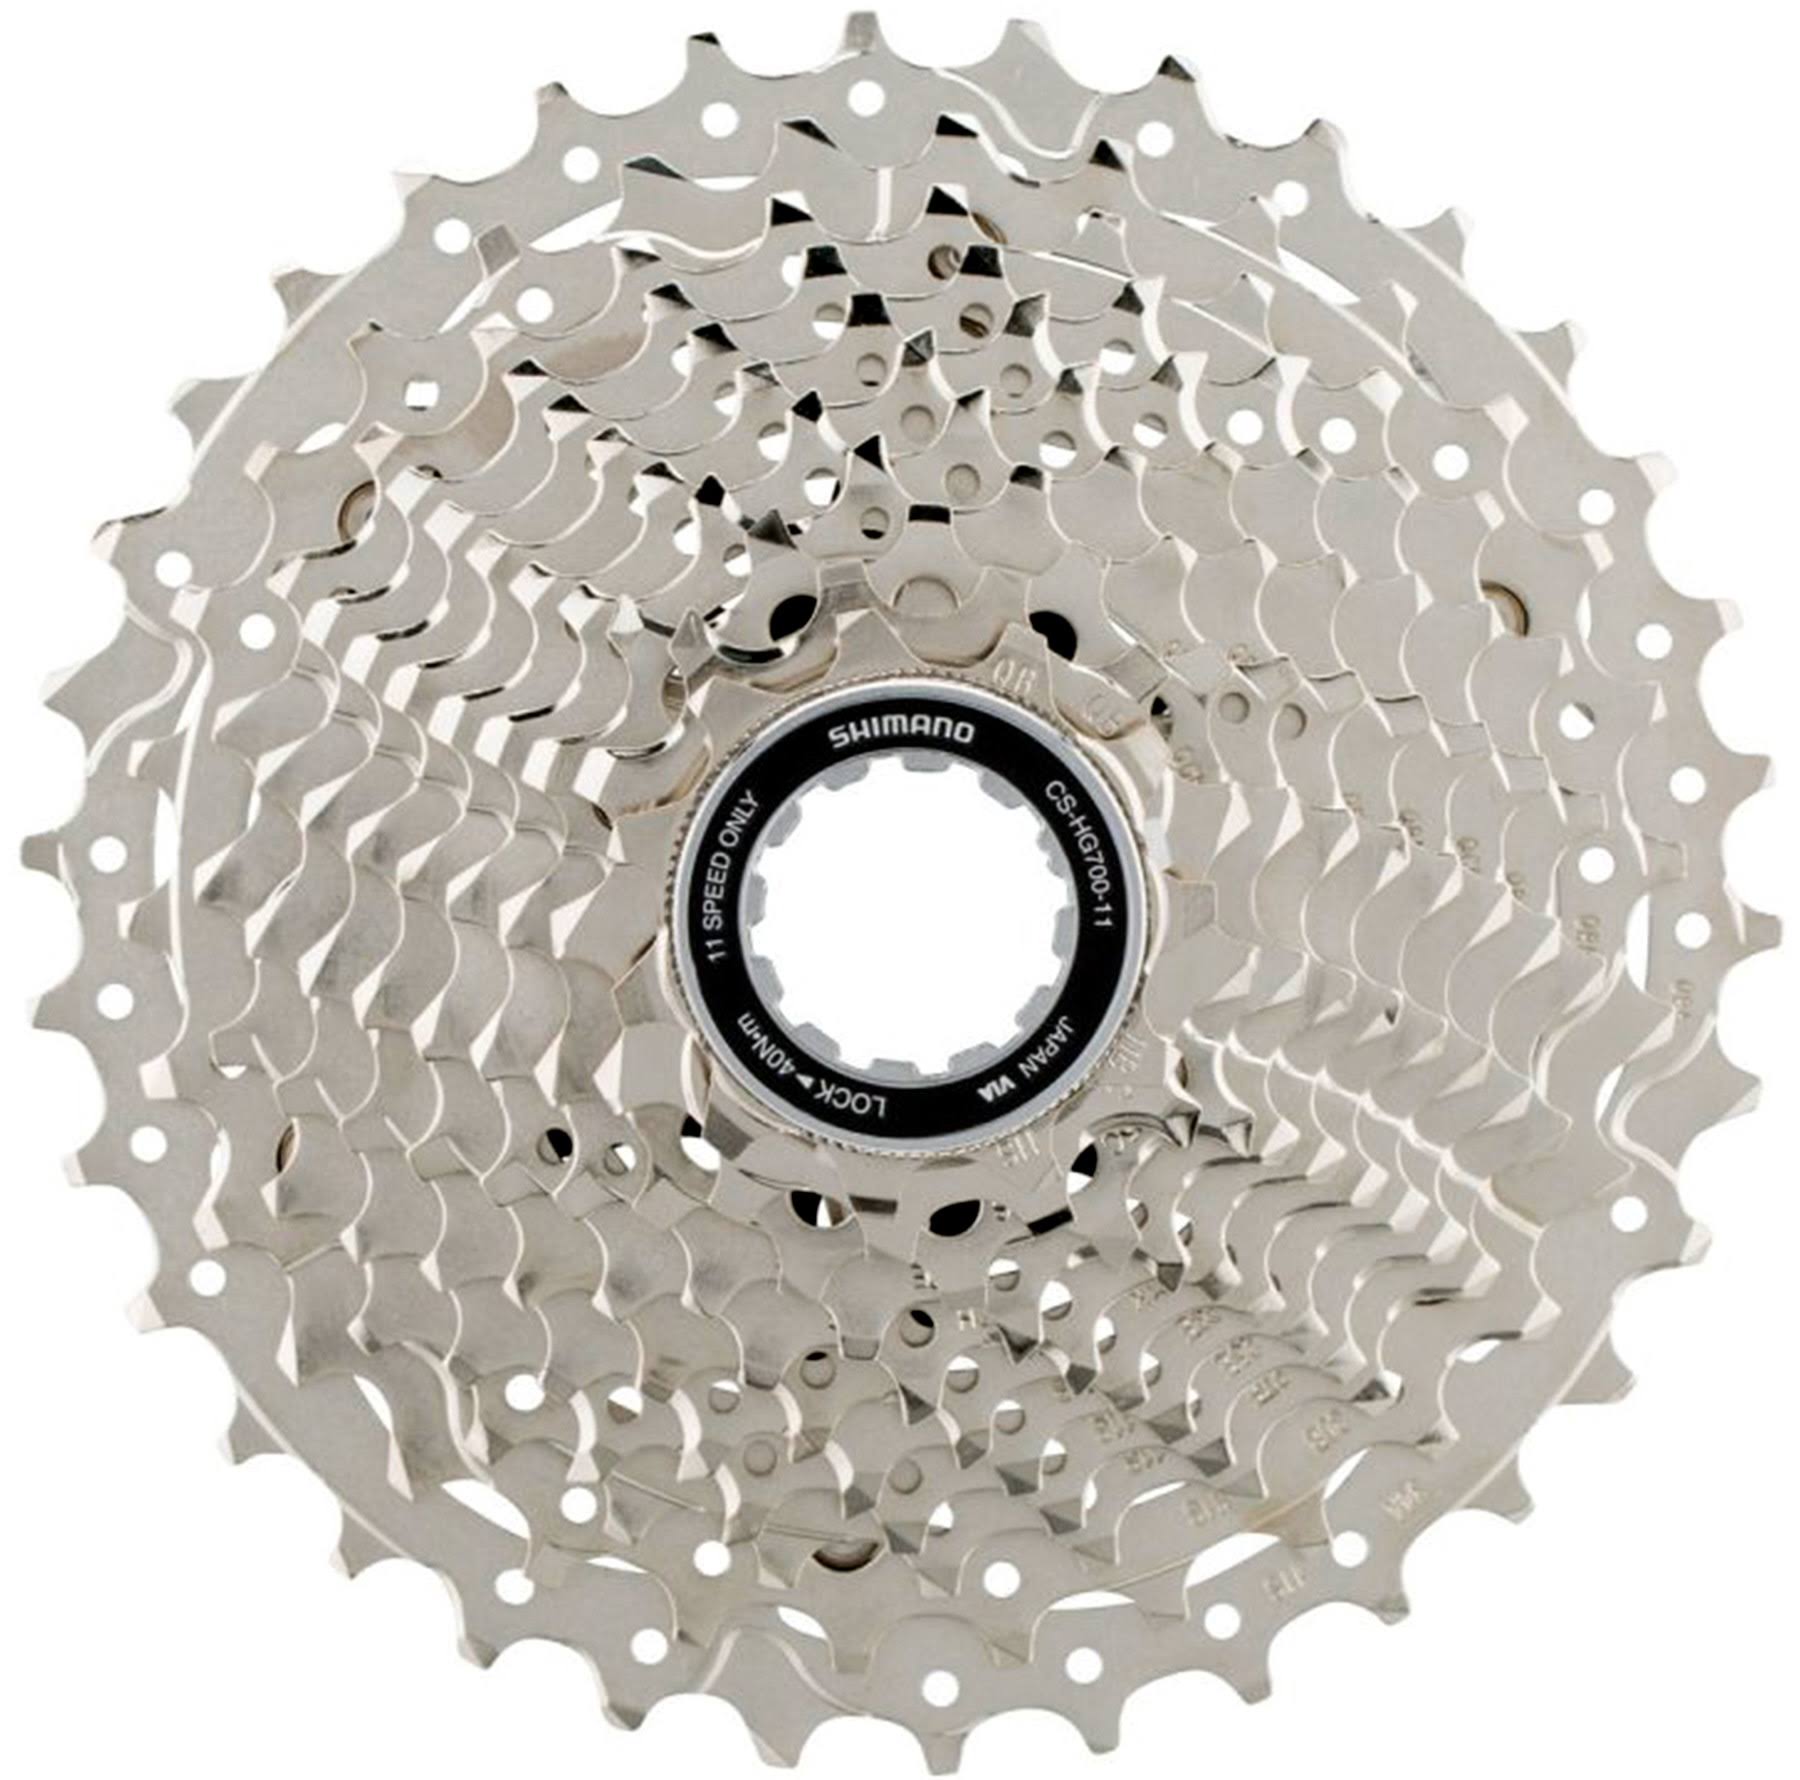 Shimano 105 Cs-hg700 Road Bike Bicycle Cassette - 11 Speed, 11T to 34T